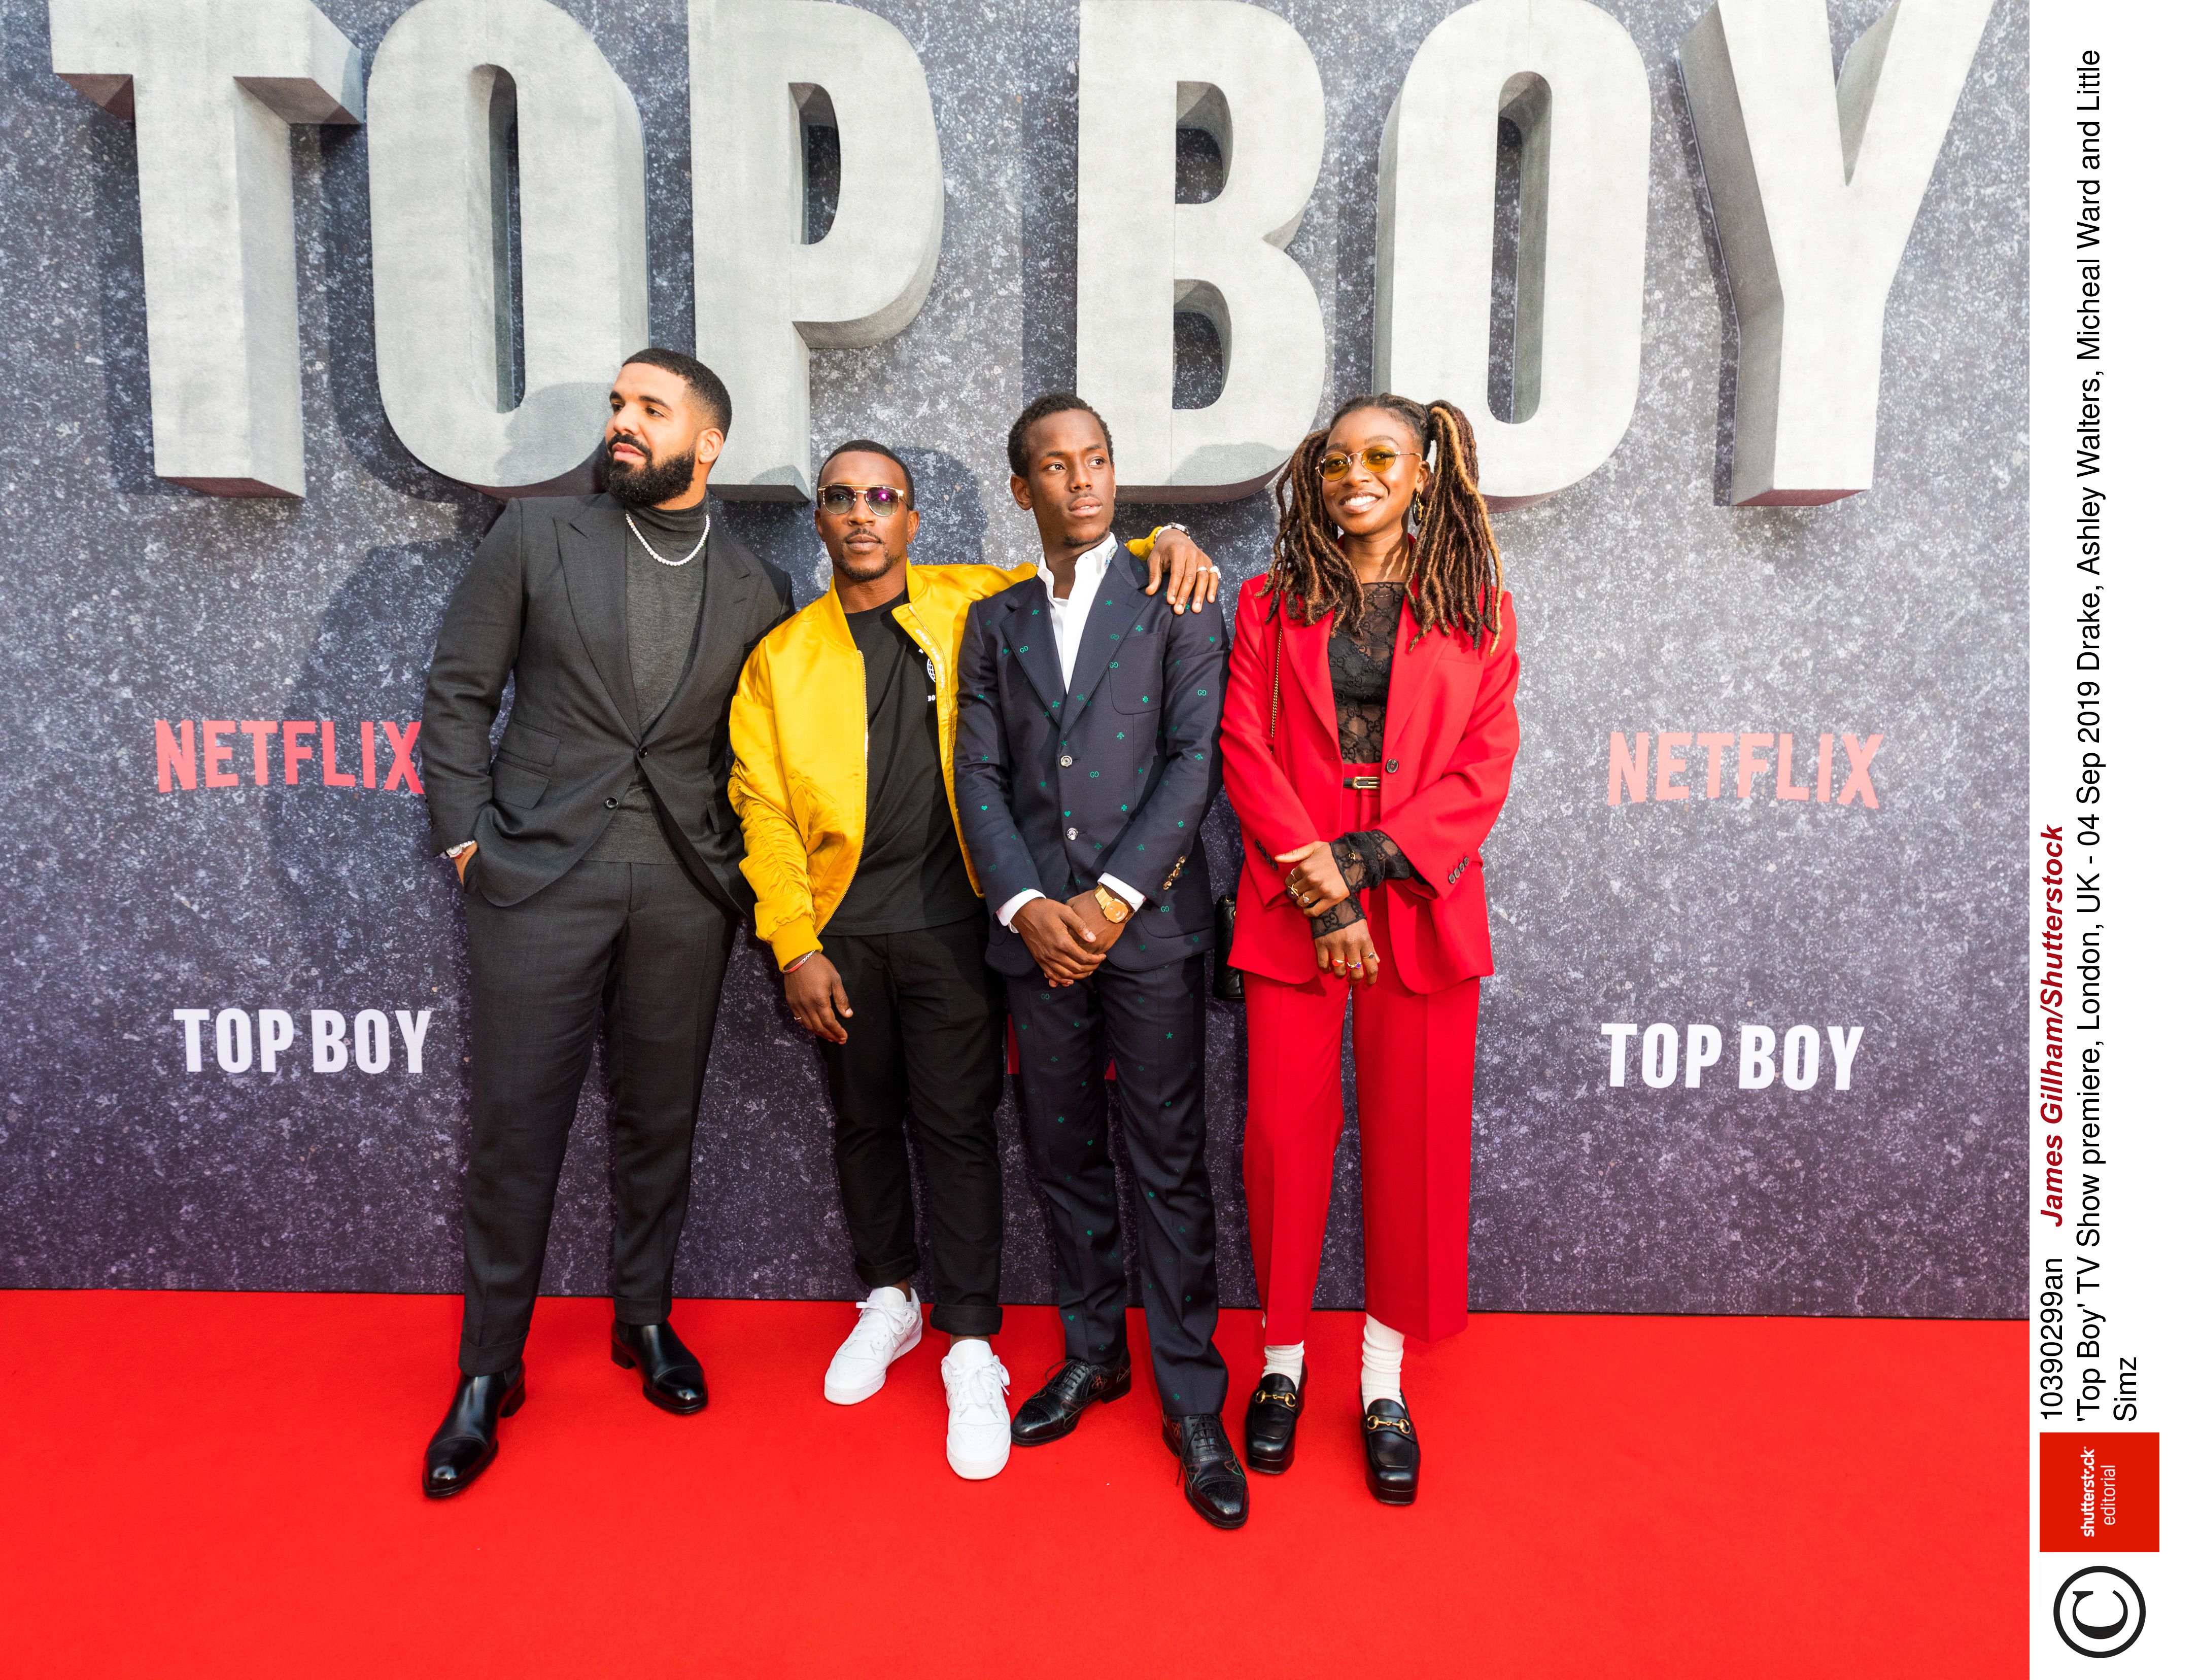 “Top Boy” casting company to hold auditions for new show in New Malden